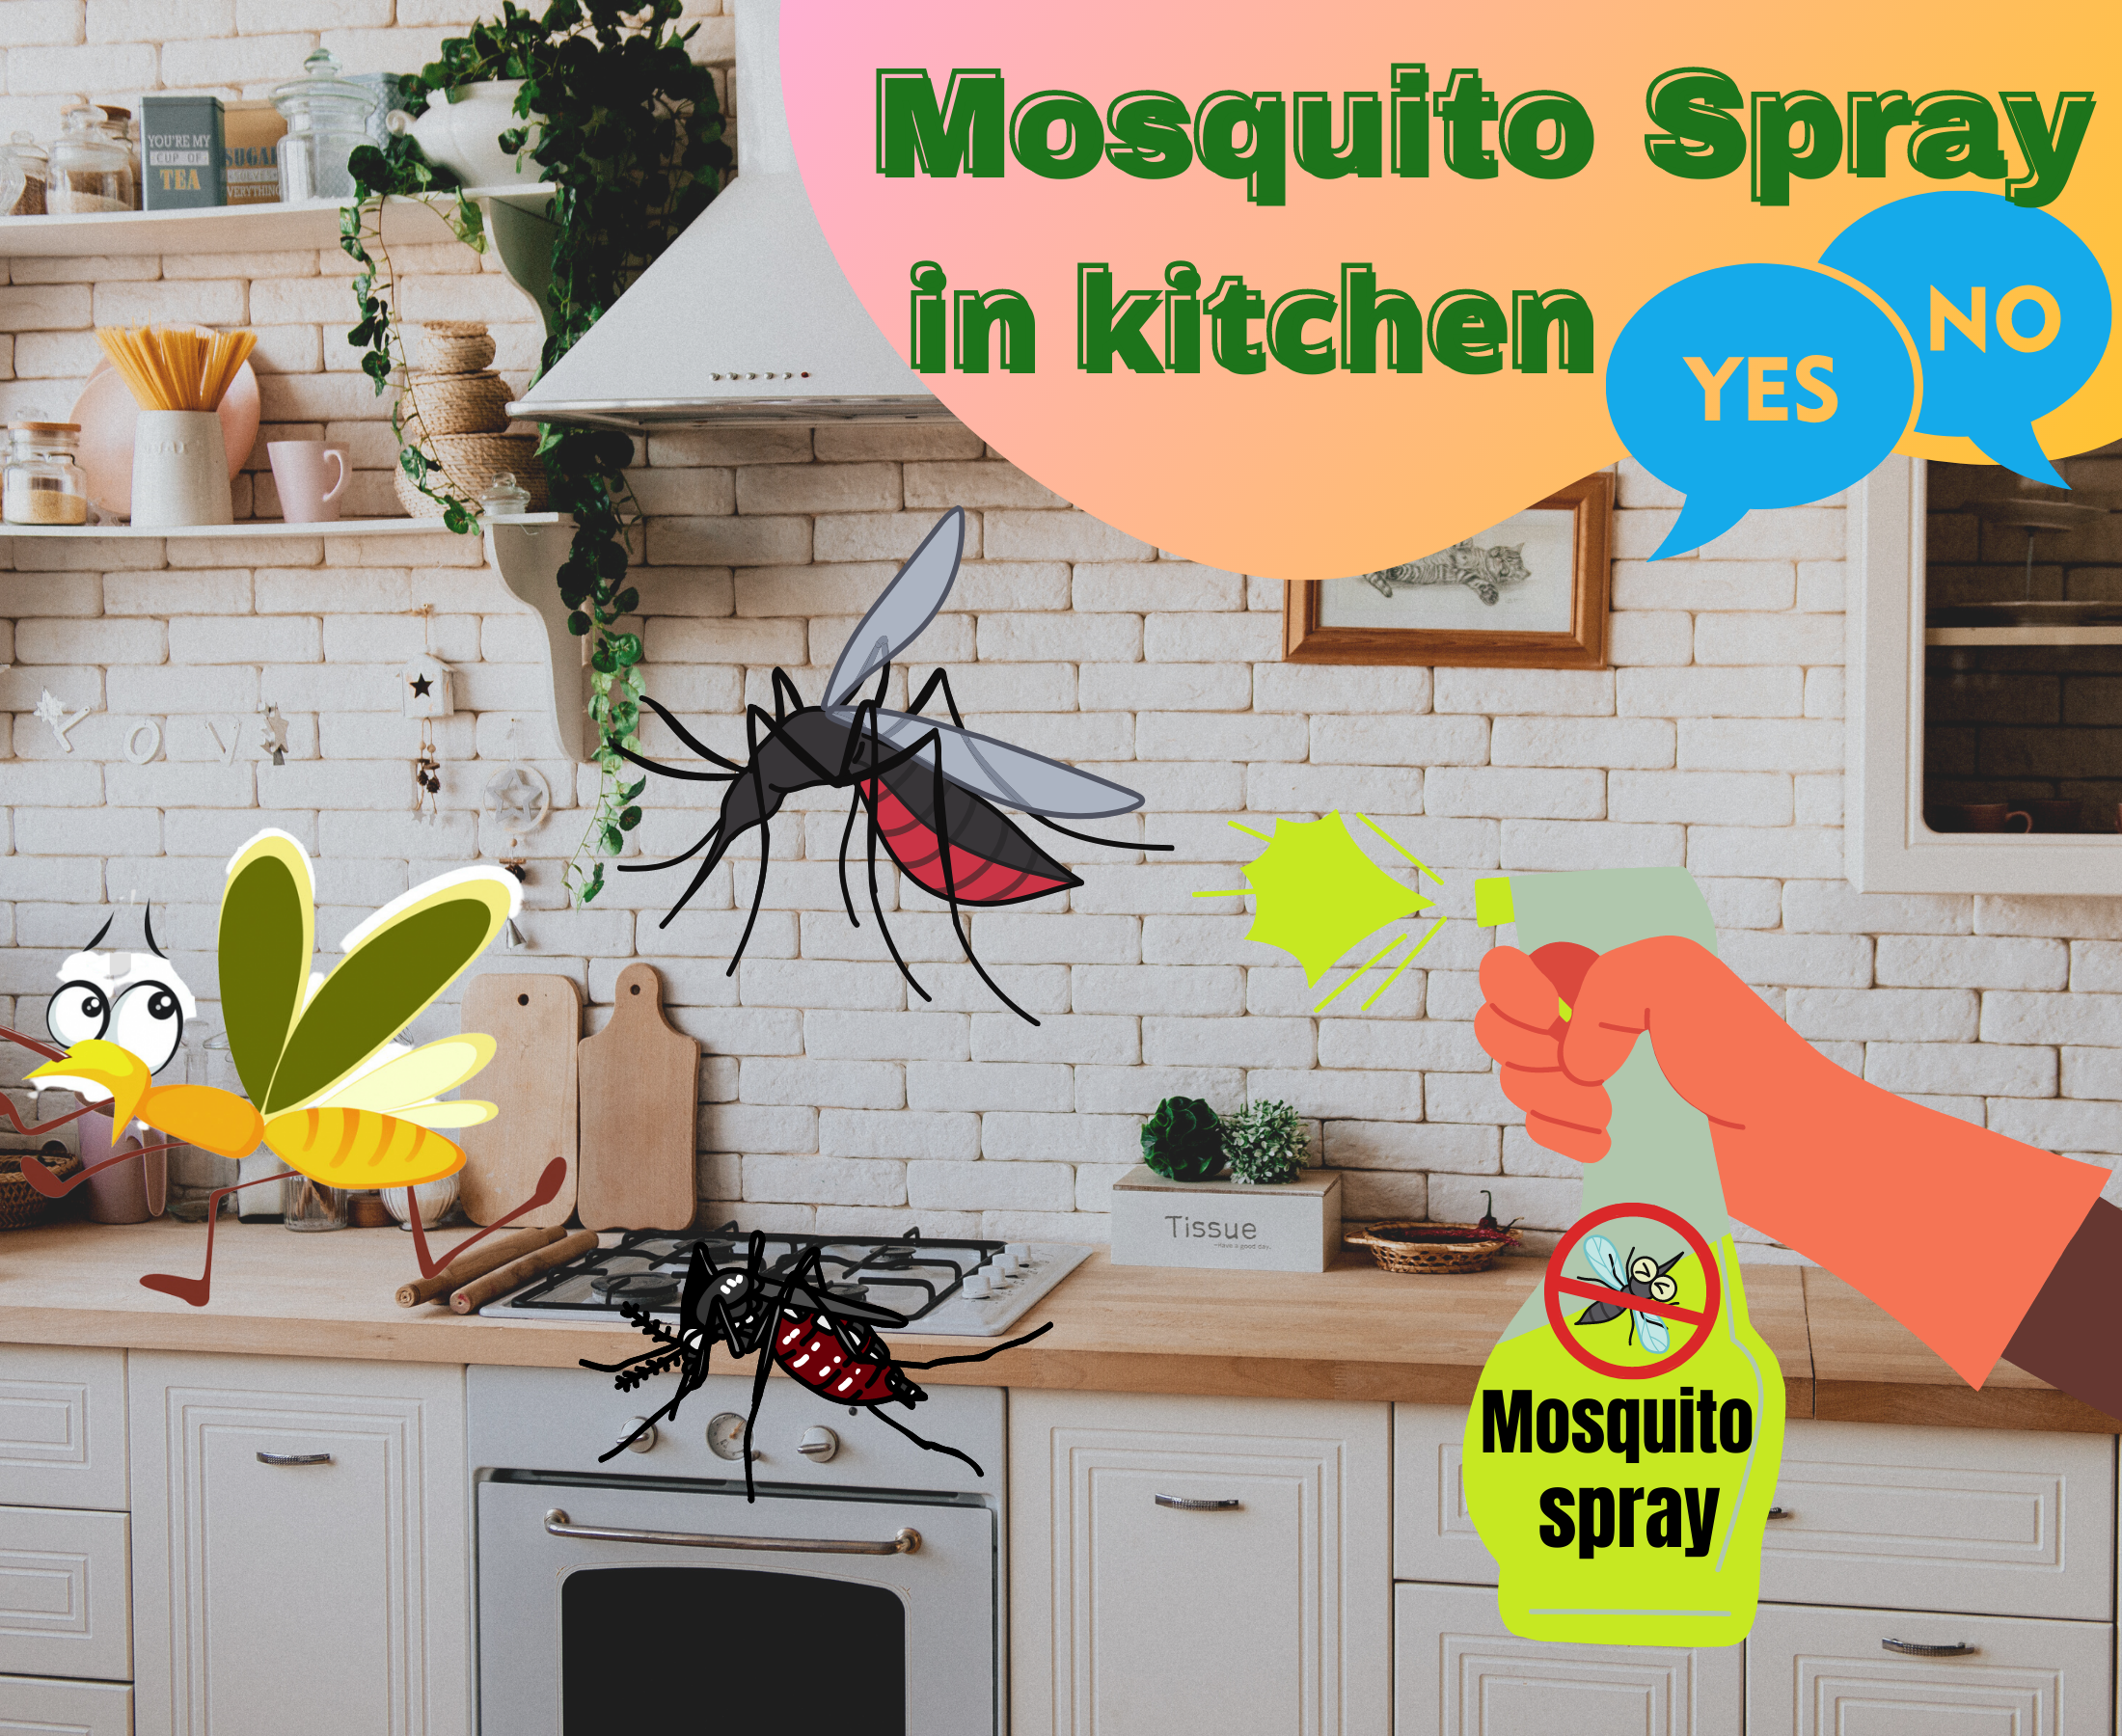 Can we use mosquito spray in kitchen or not?